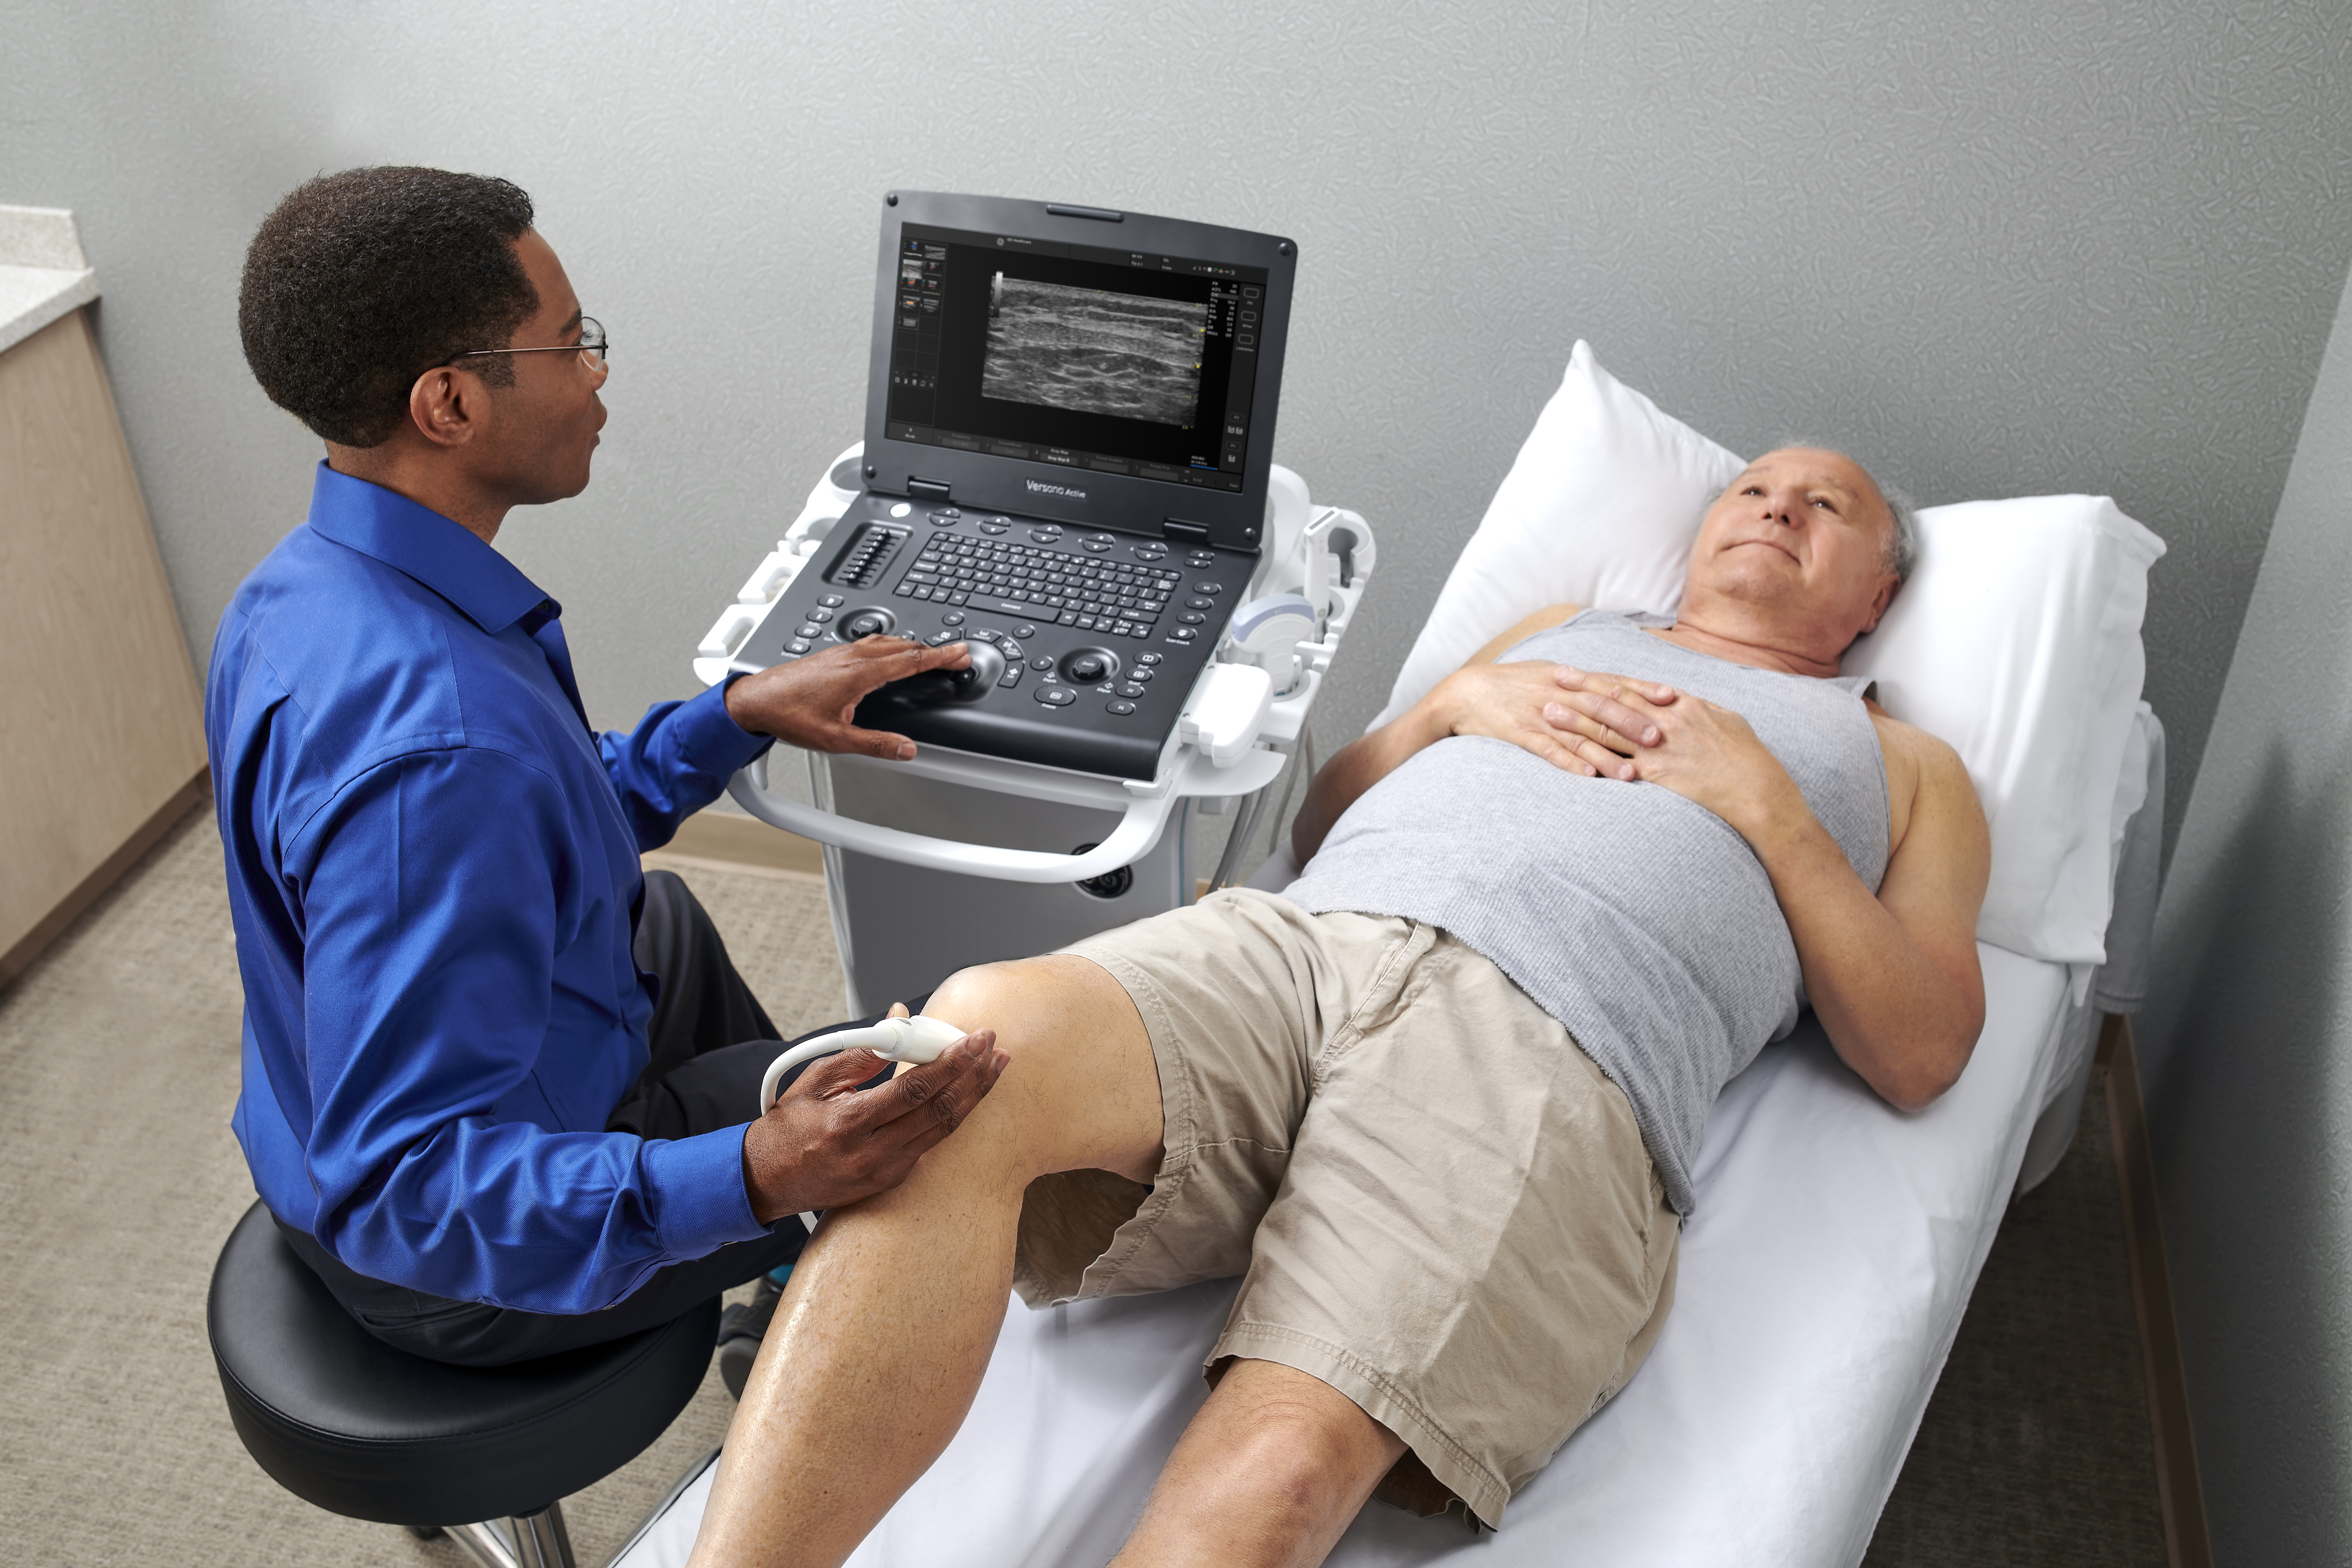 GPs are increasingly discovering the clinical benefits of musculoskeletal ultrasound. Learn more about how it can help your practice.